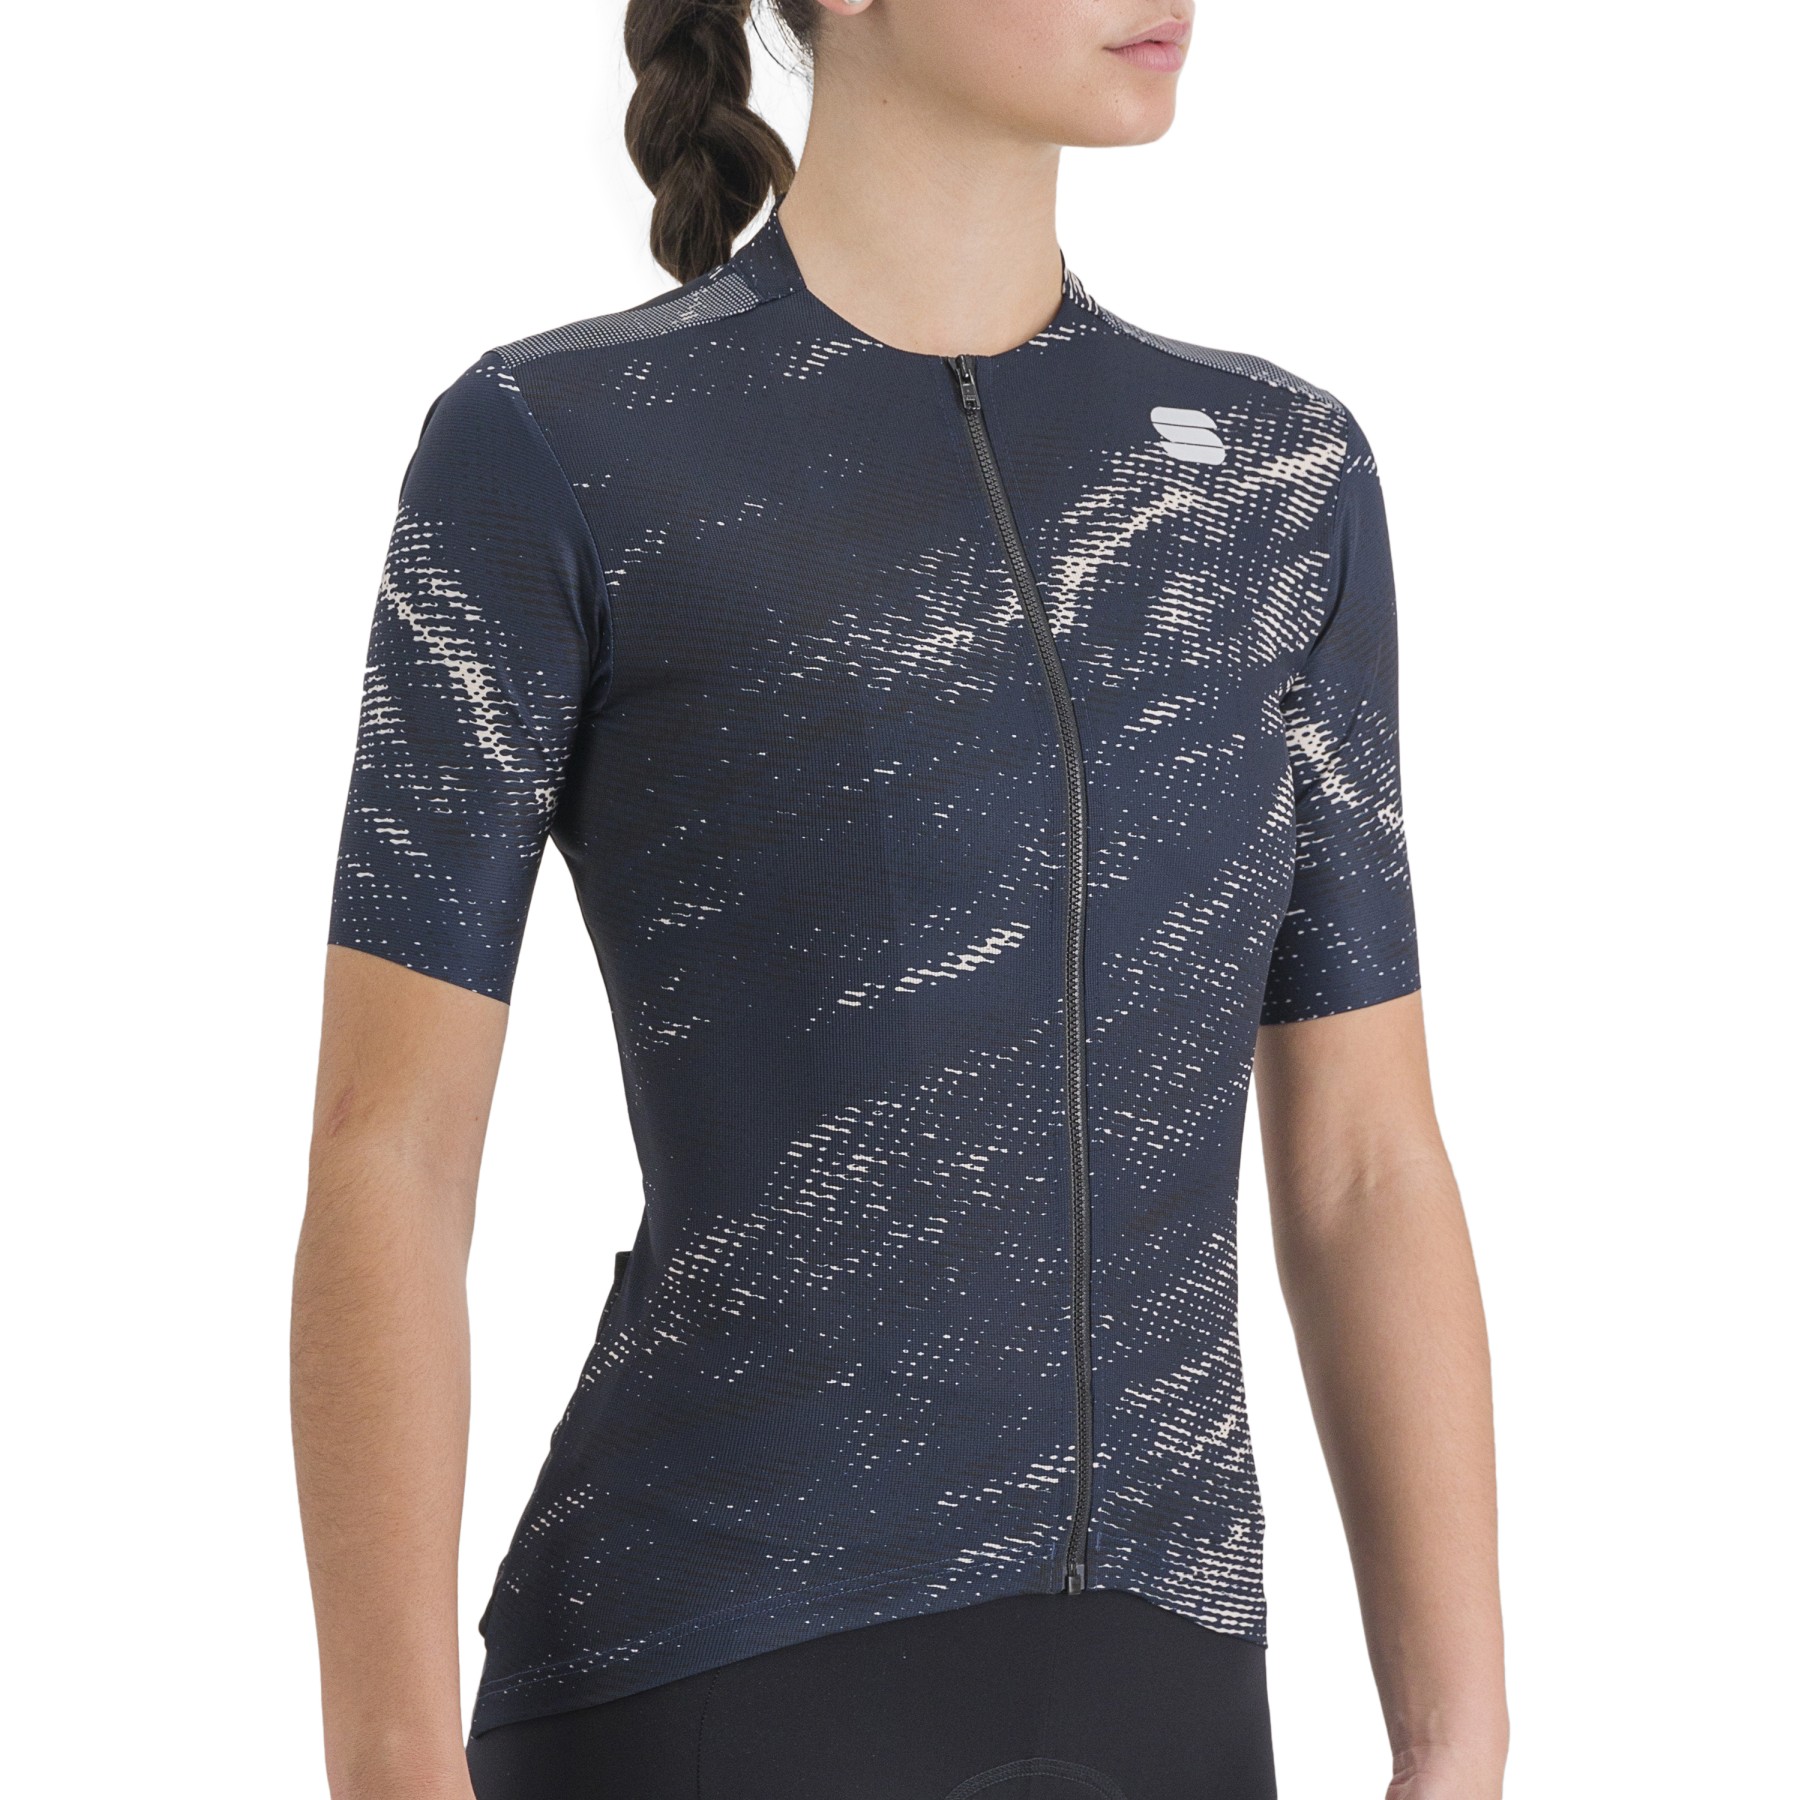 Picture of Sportful Cliff Supergiara Women Jersey - 456 Galaxy Blue